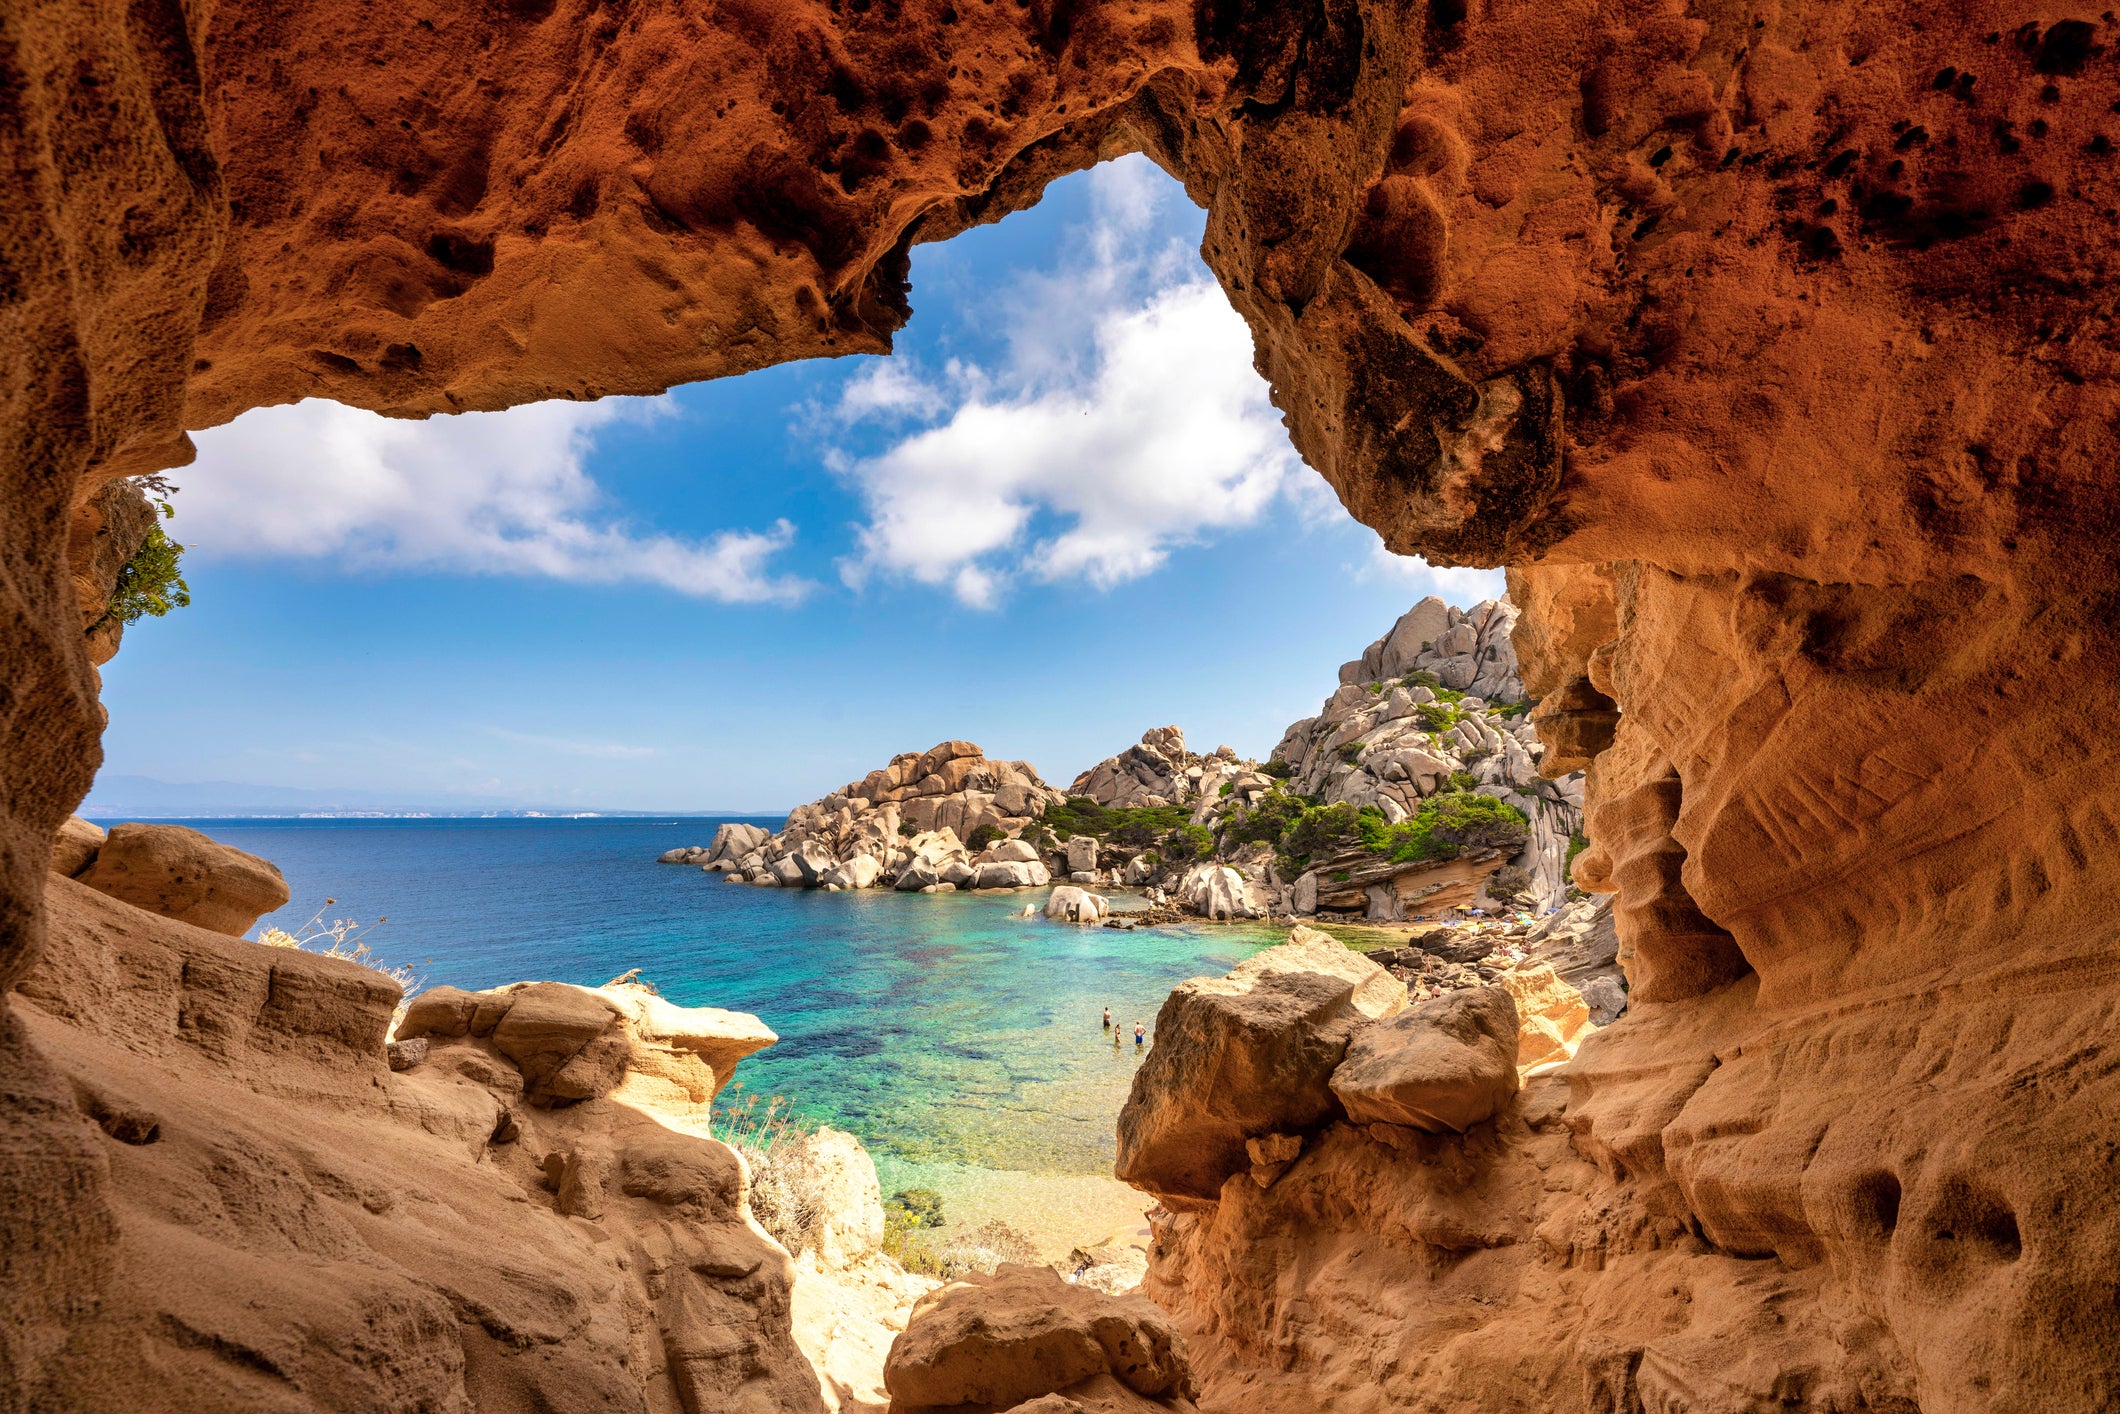 Cala Spinosa is one of the prettiest beaches in the Gallura region, northern Sardinia